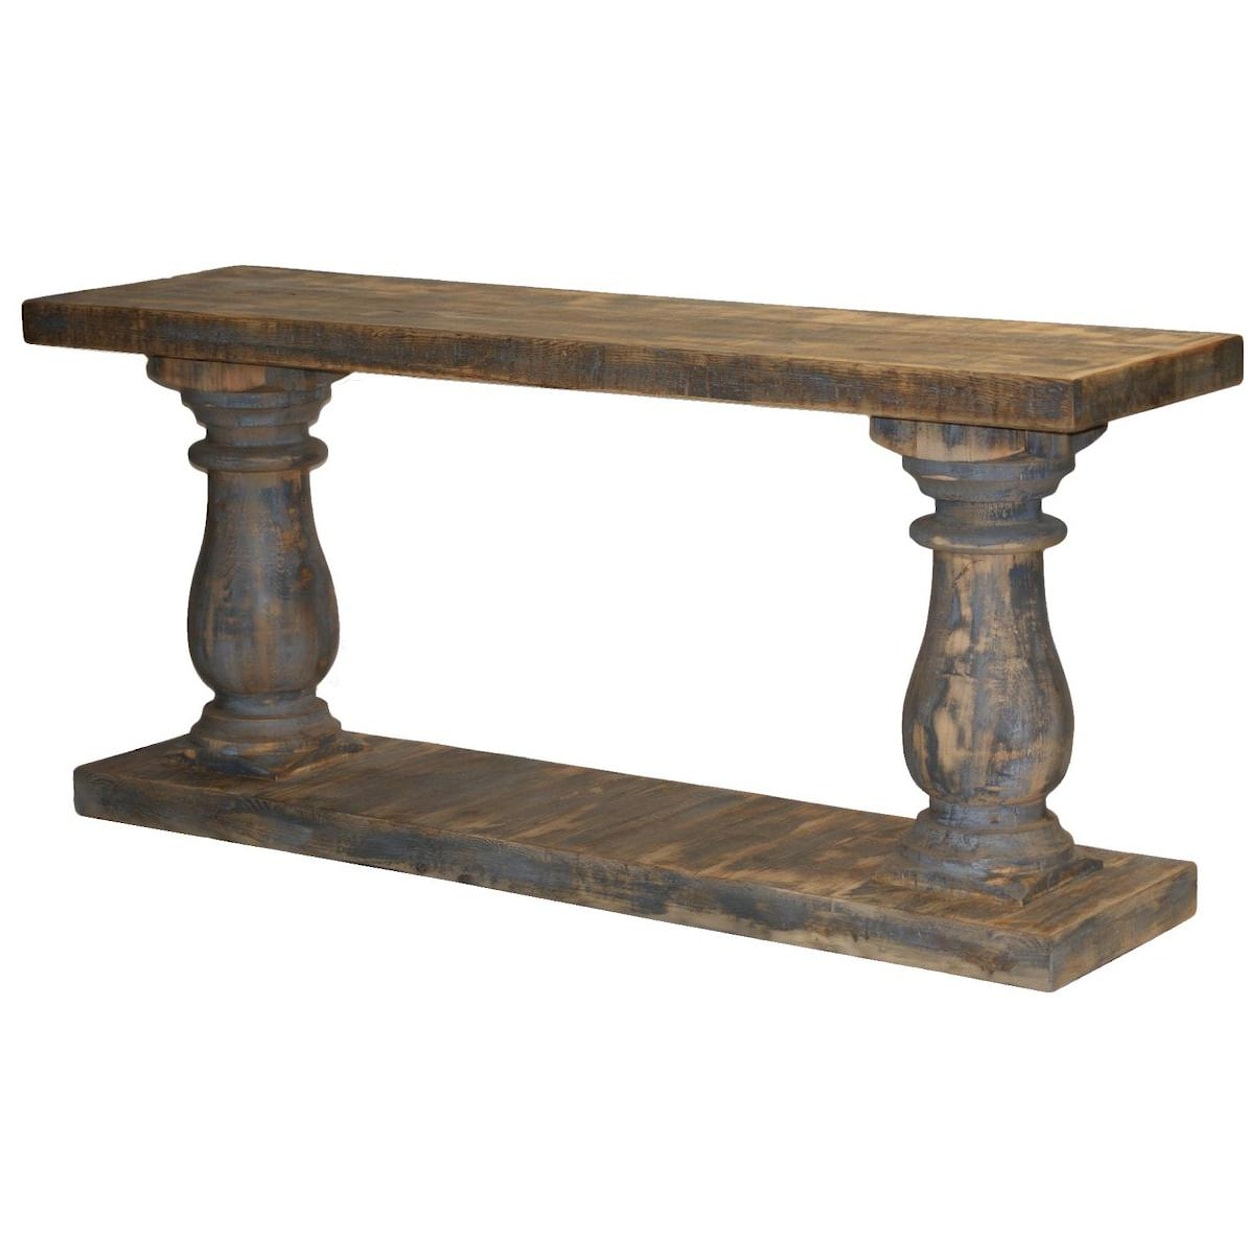 Furniture Source International Occasional Tables Console